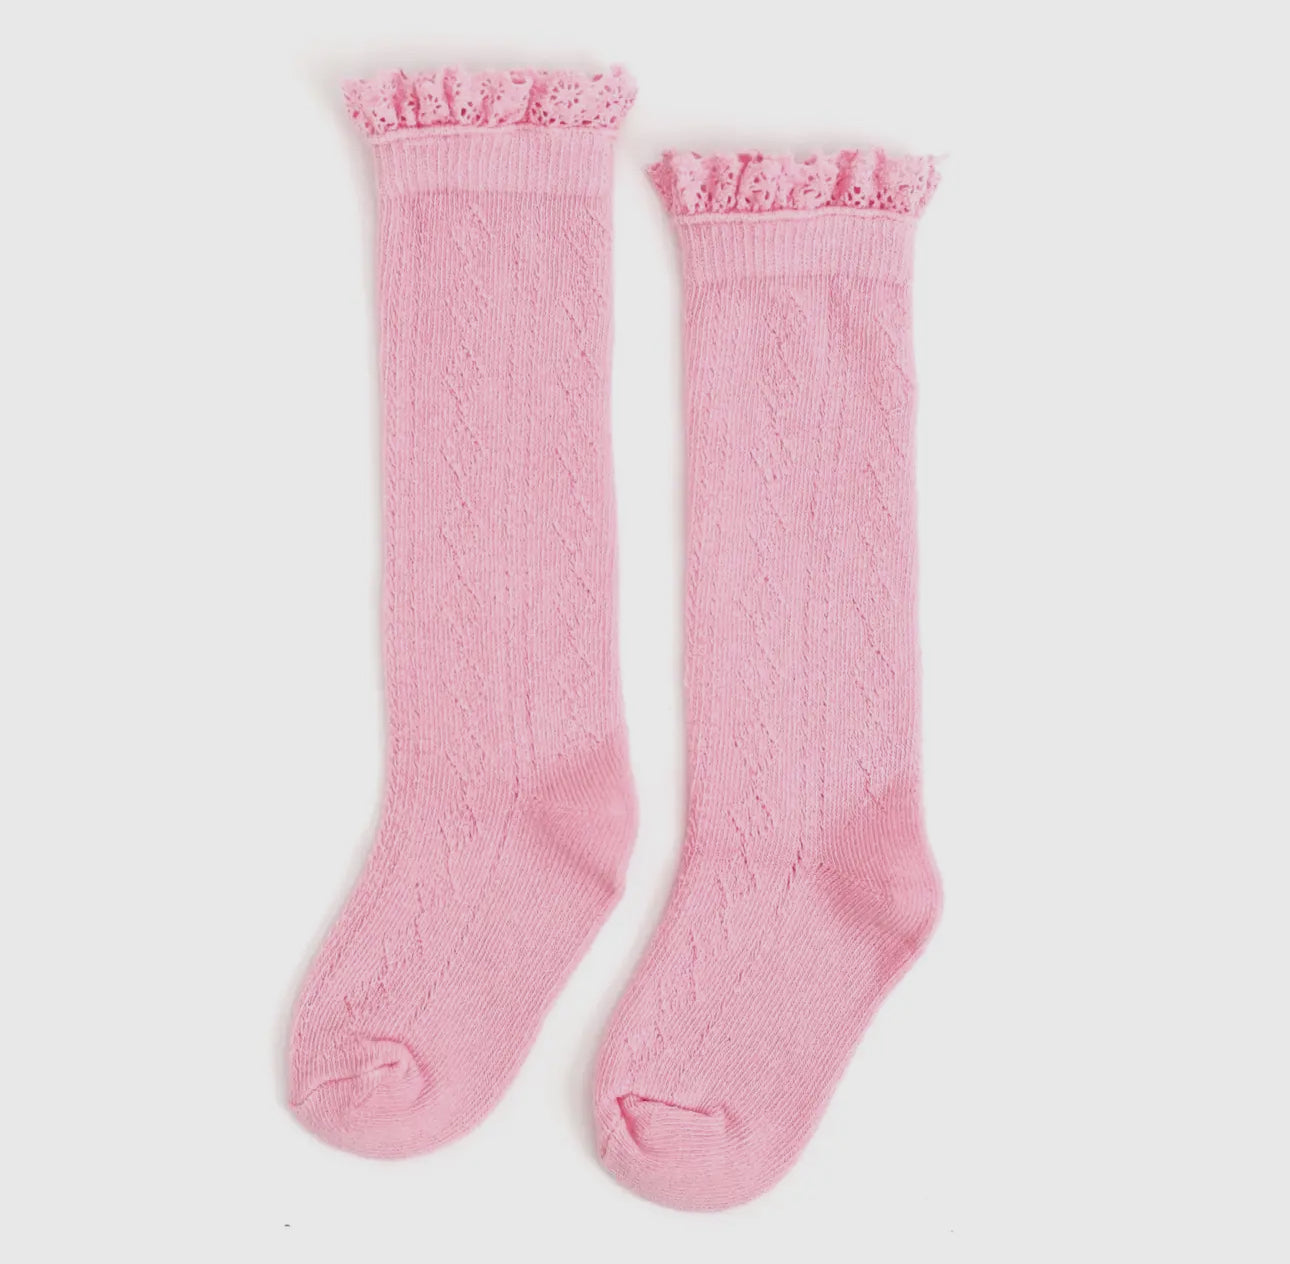 Little Stocking Co Lace Knee High Socks